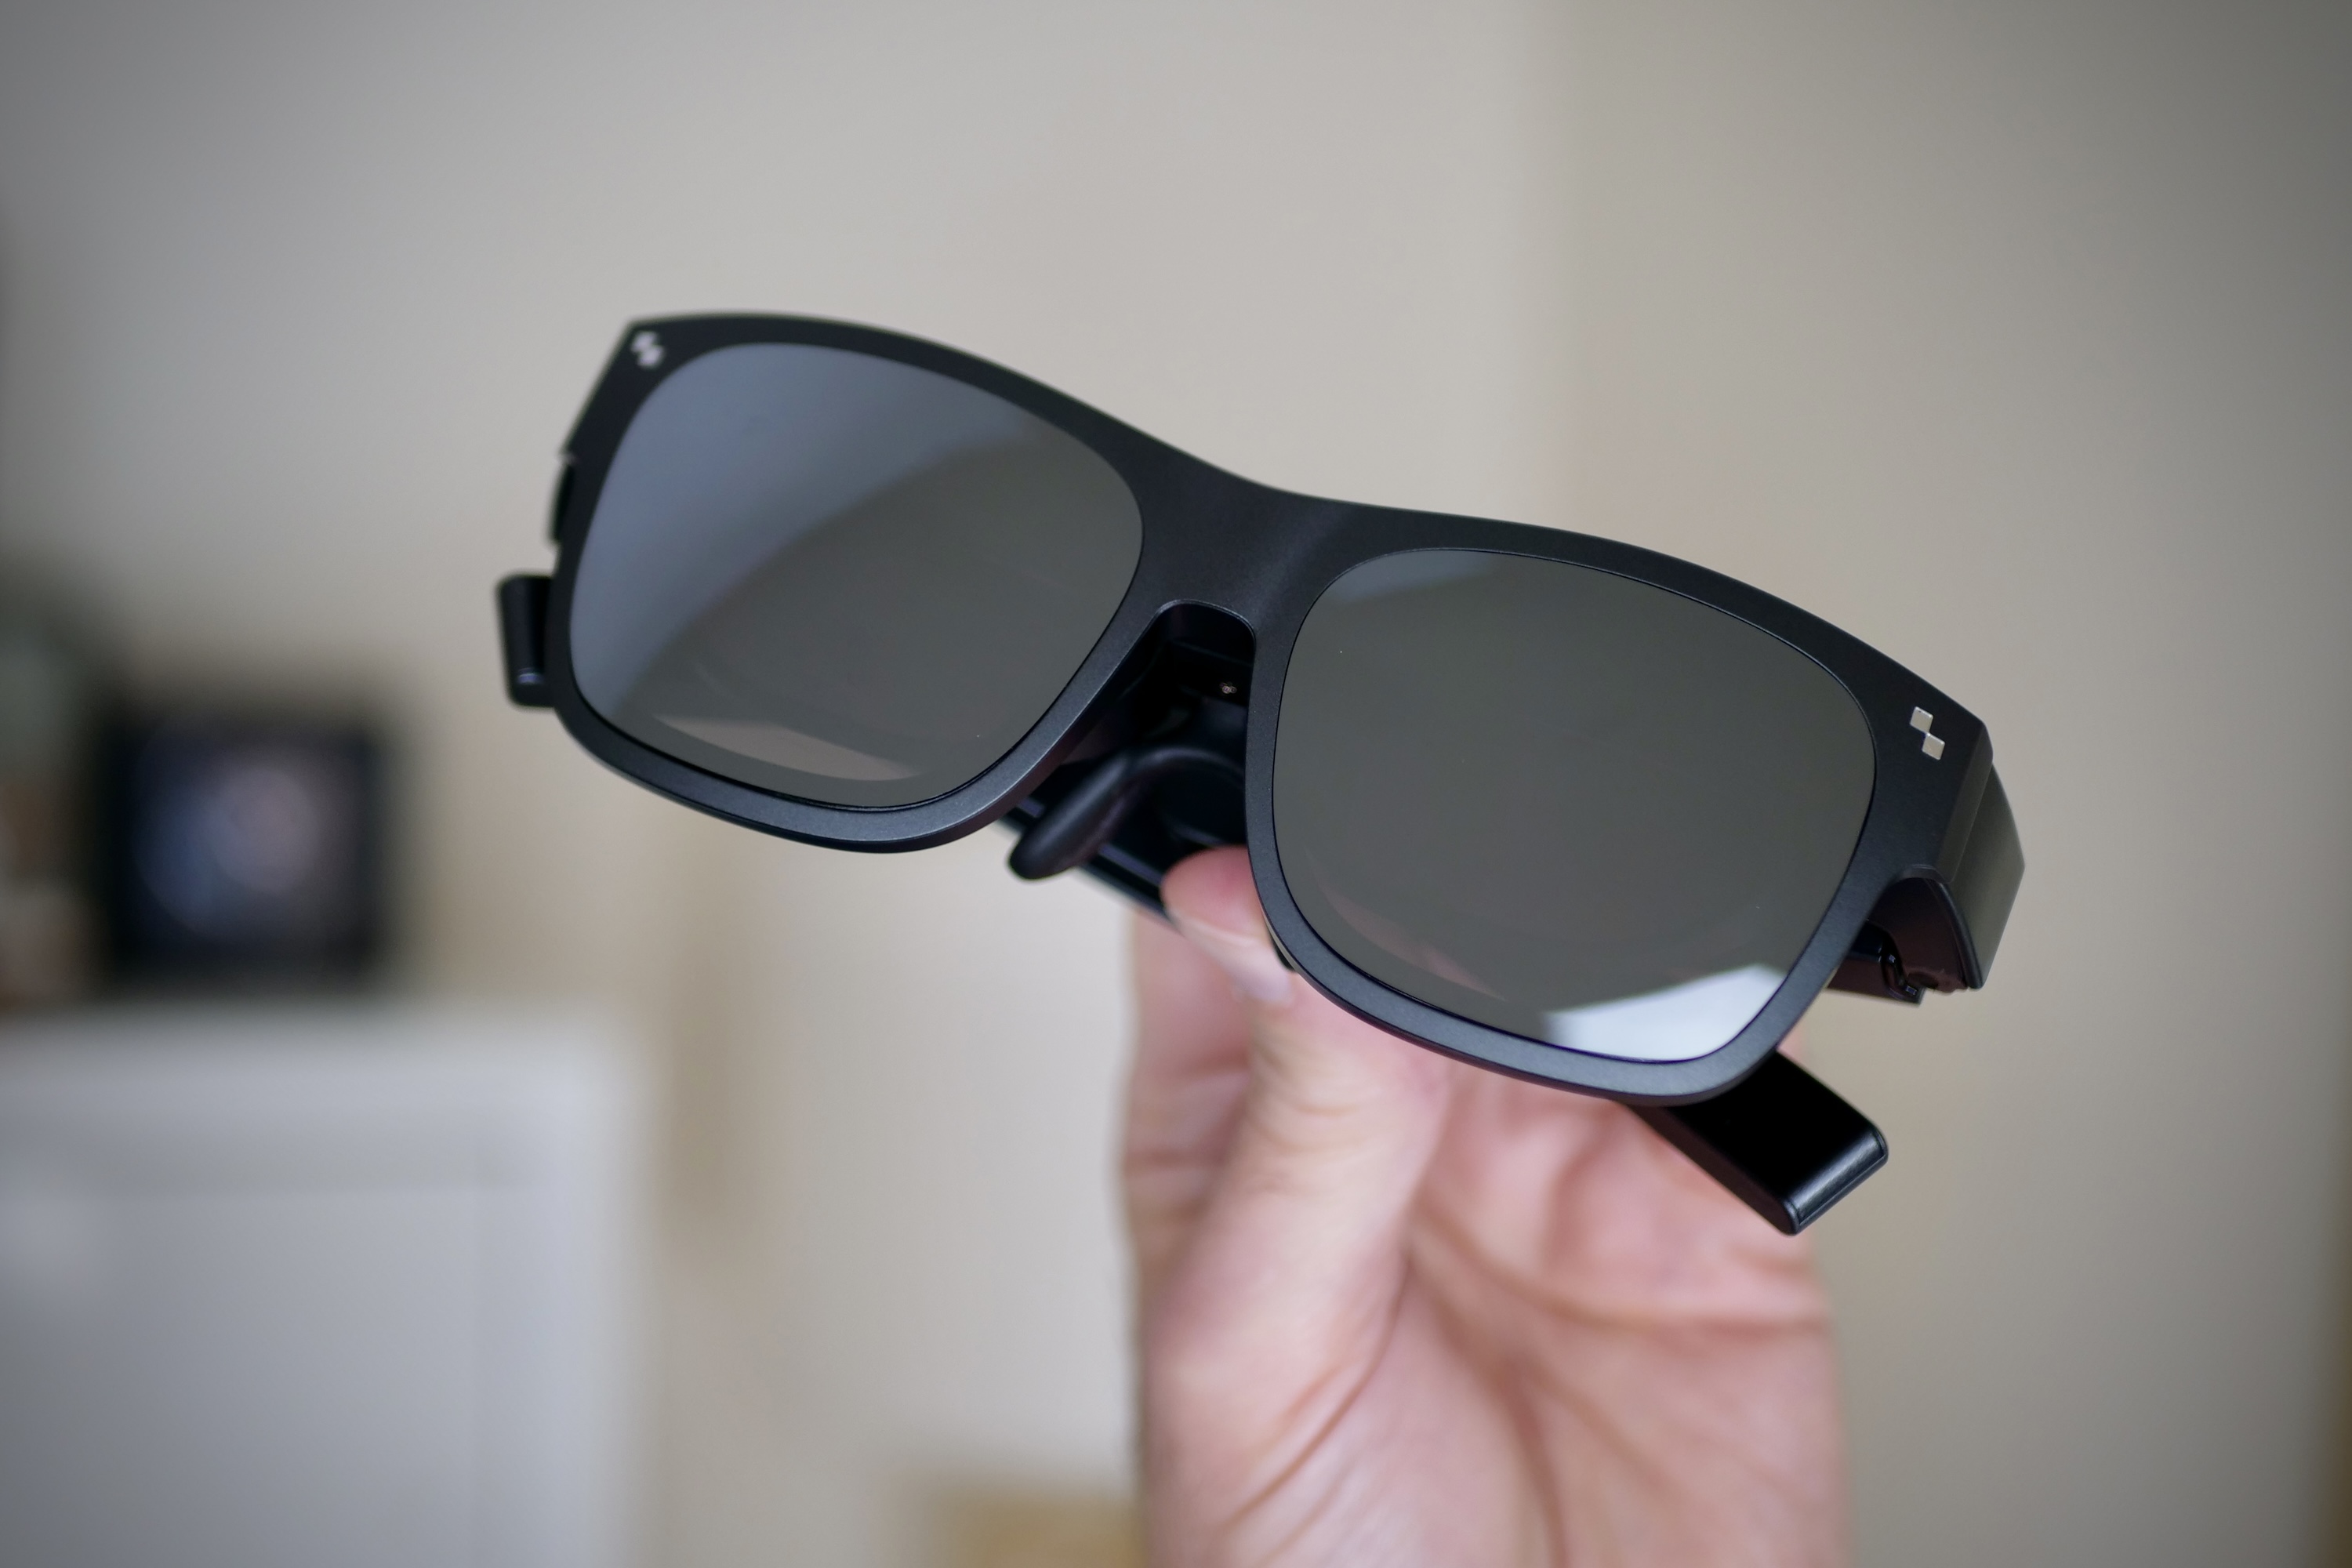 The TCL RayNeo Nxtwear S XR glasses with the sunglass attachment.